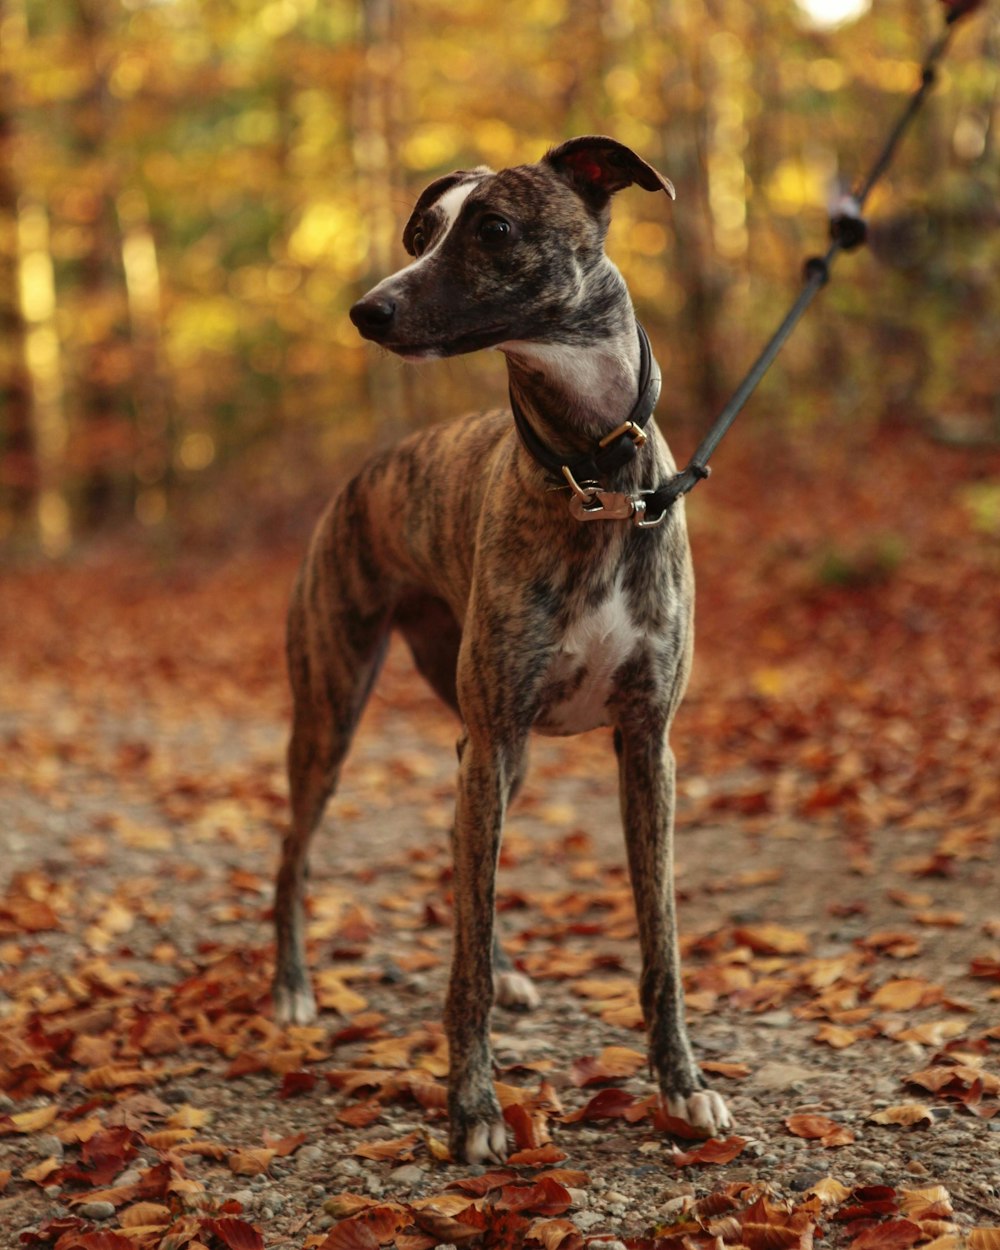 brindle hound standing on dried leaves